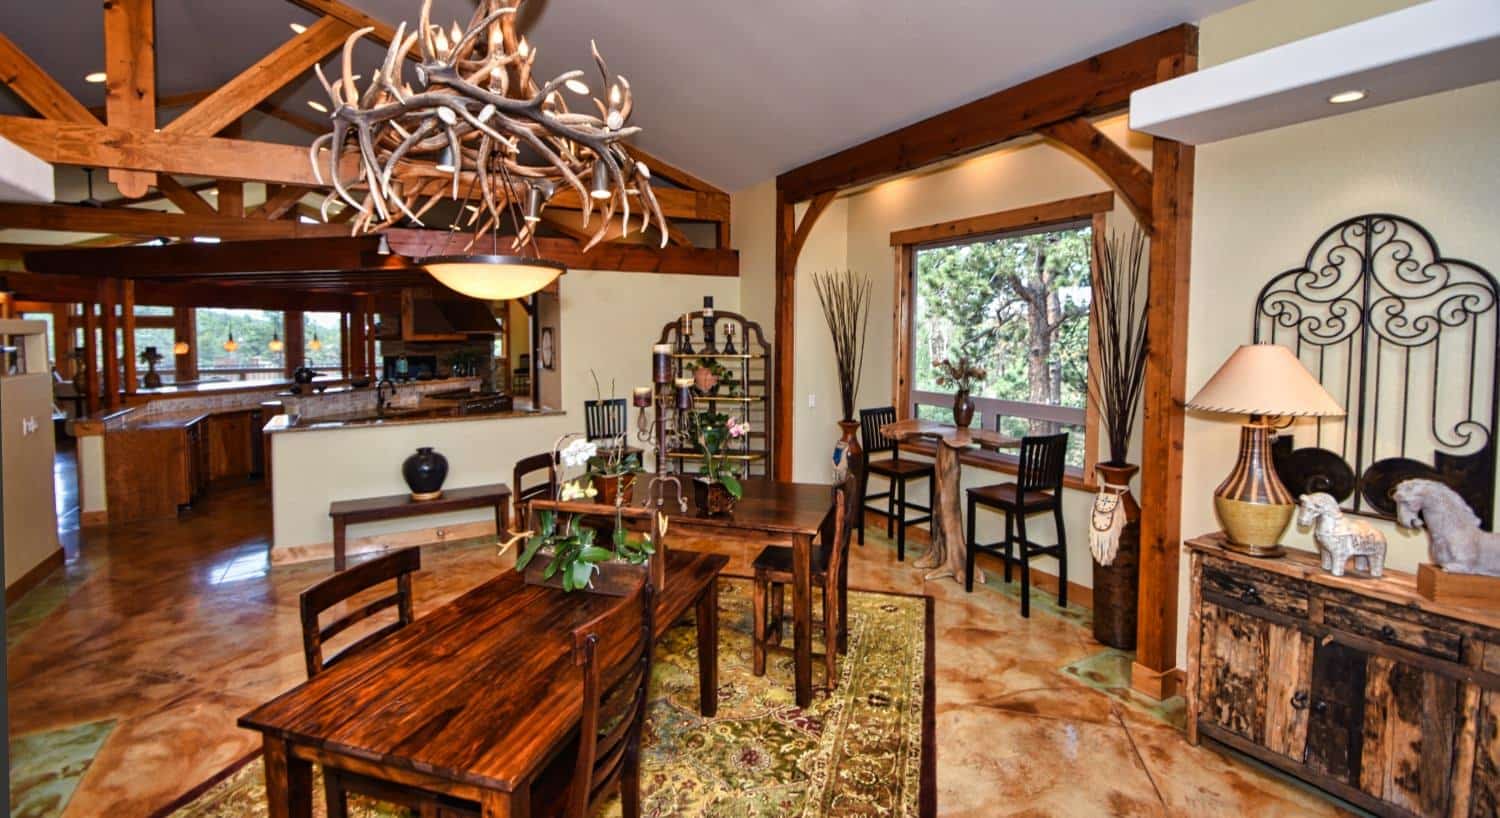 Large dining area with stamped concrete flooring, antler lighting feature, and large window to the outside